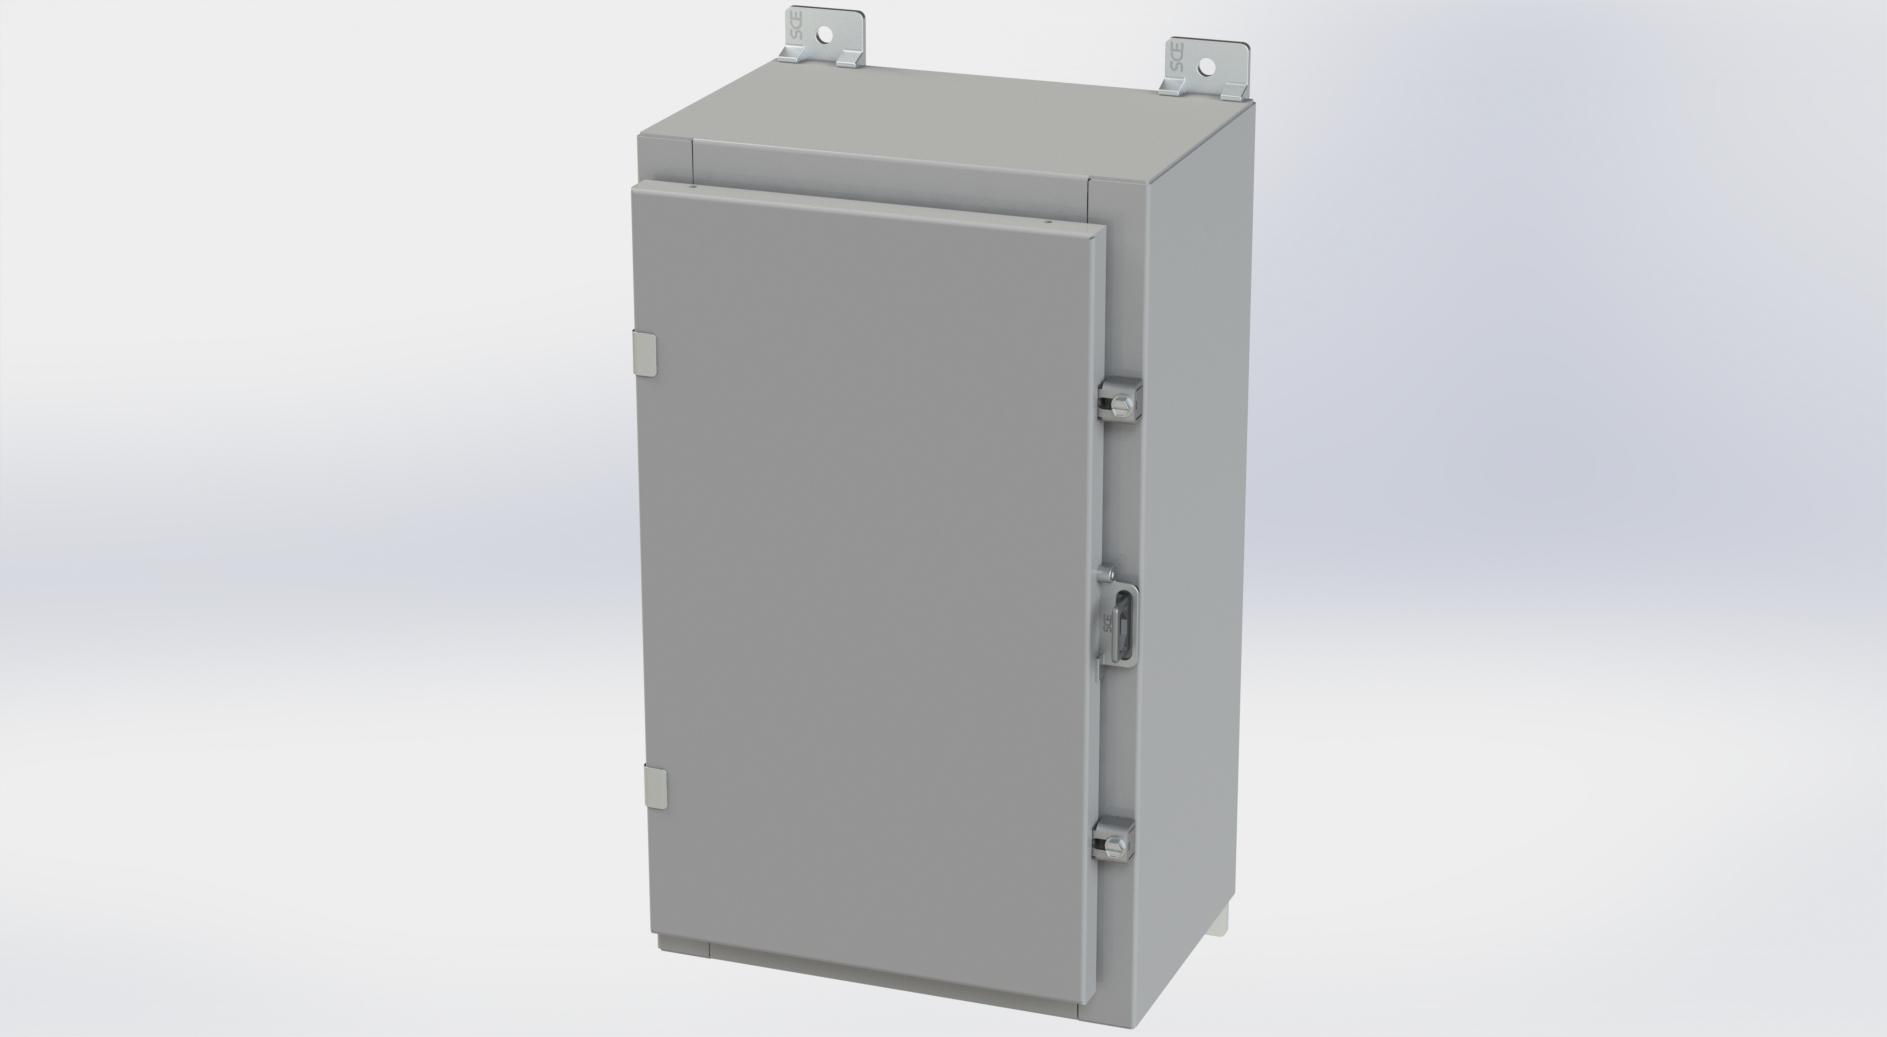 Saginaw Control SCE-20H1208LP Nema 4 LP Enclosure, Height:20.00", Width:12.00", Depth:8.00", ANSI-61 gray powder coating inside and out. Optional panels are powder coated white.